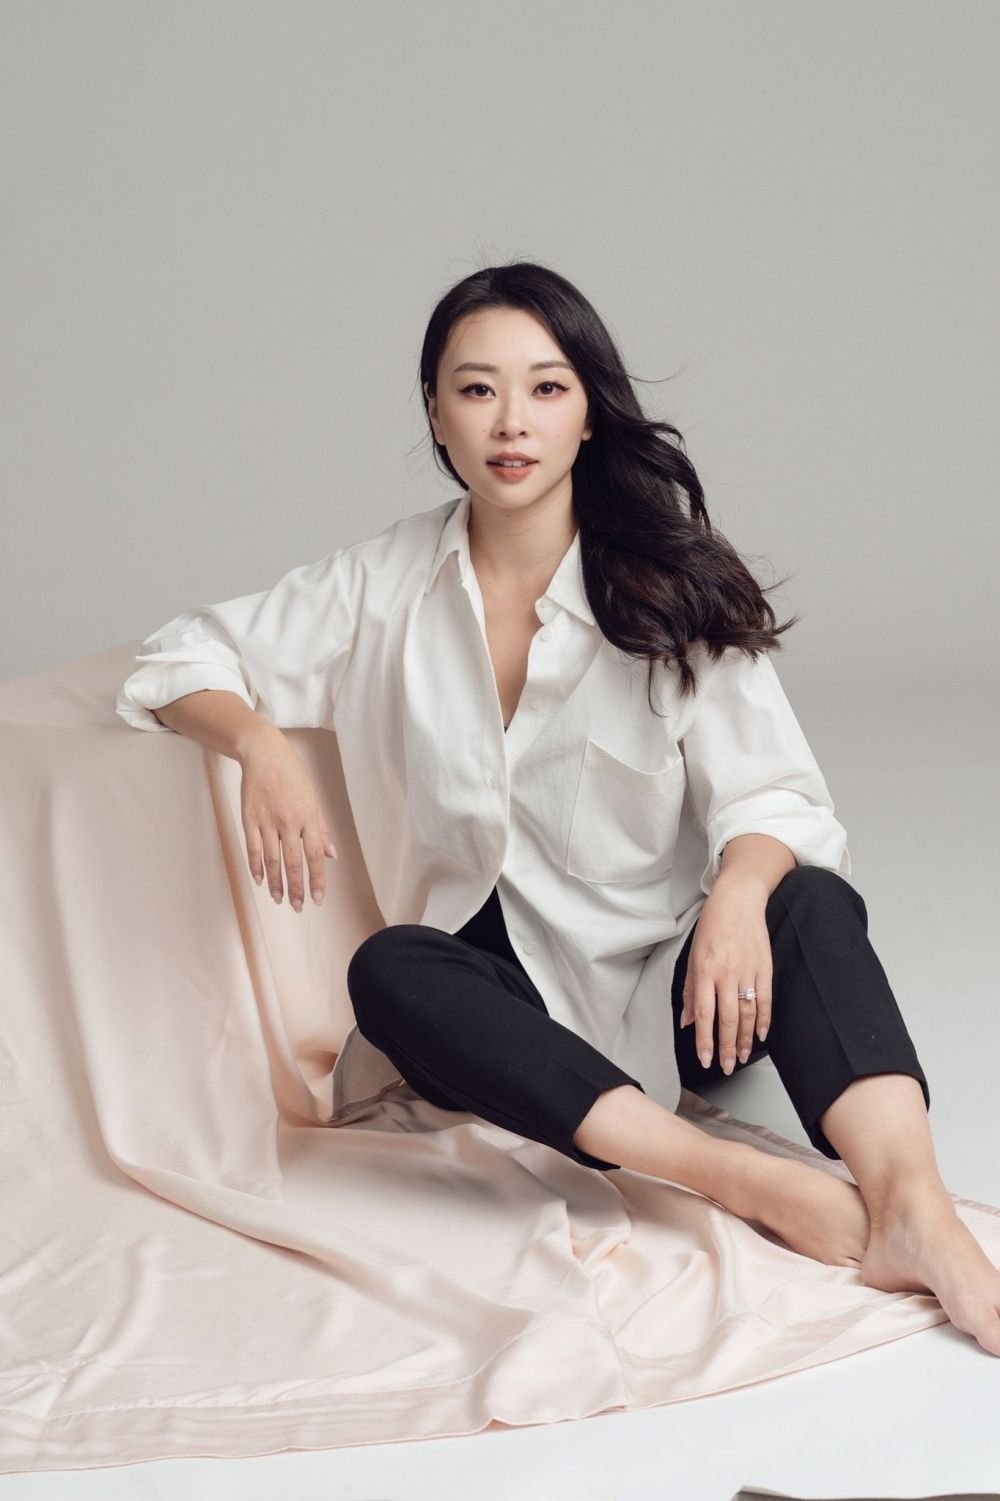 Model Folio: NakedLab’s Joyce Lau on Being the Queen of Consolation